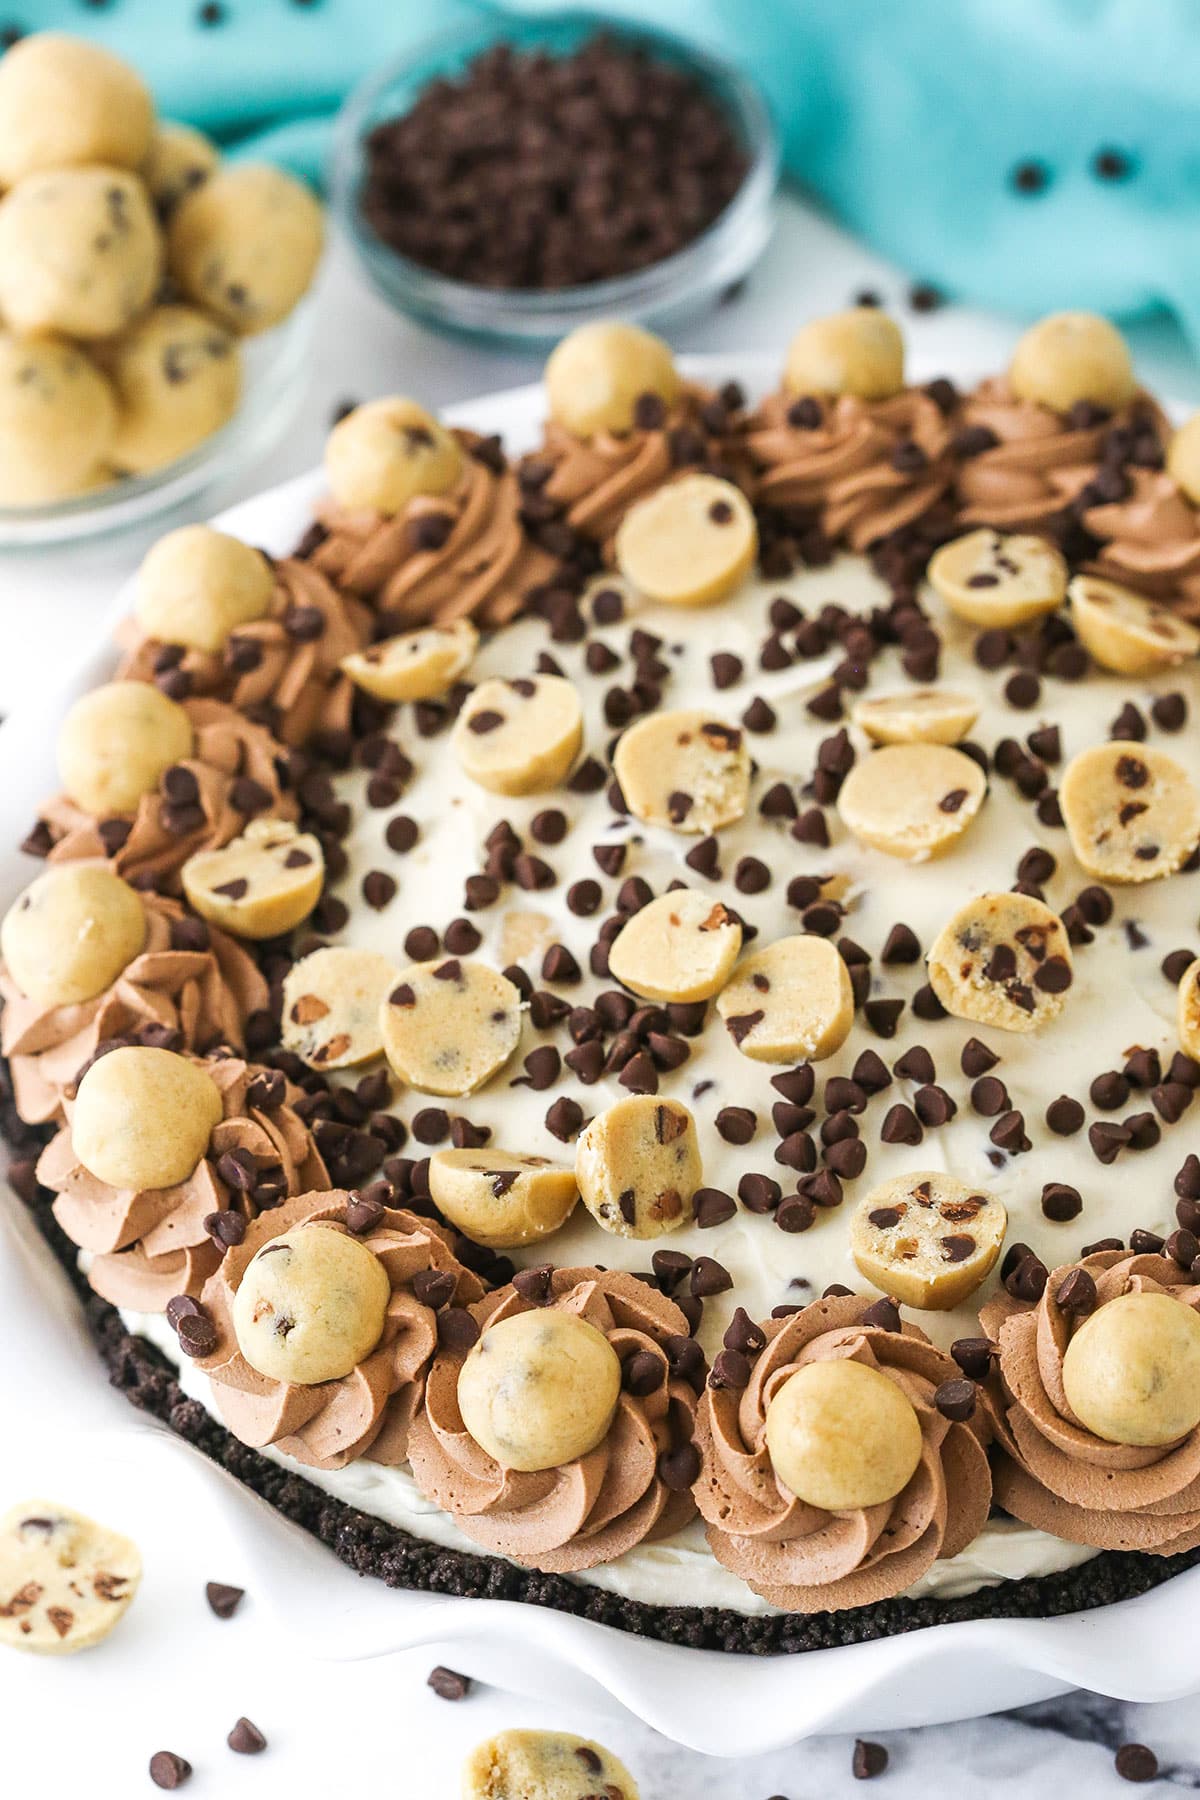 Overhead view of a full Chocolate Chip Cookie Dough Ice Cream Pie in a white platter with cookie dough balls and chocolate chips in the background